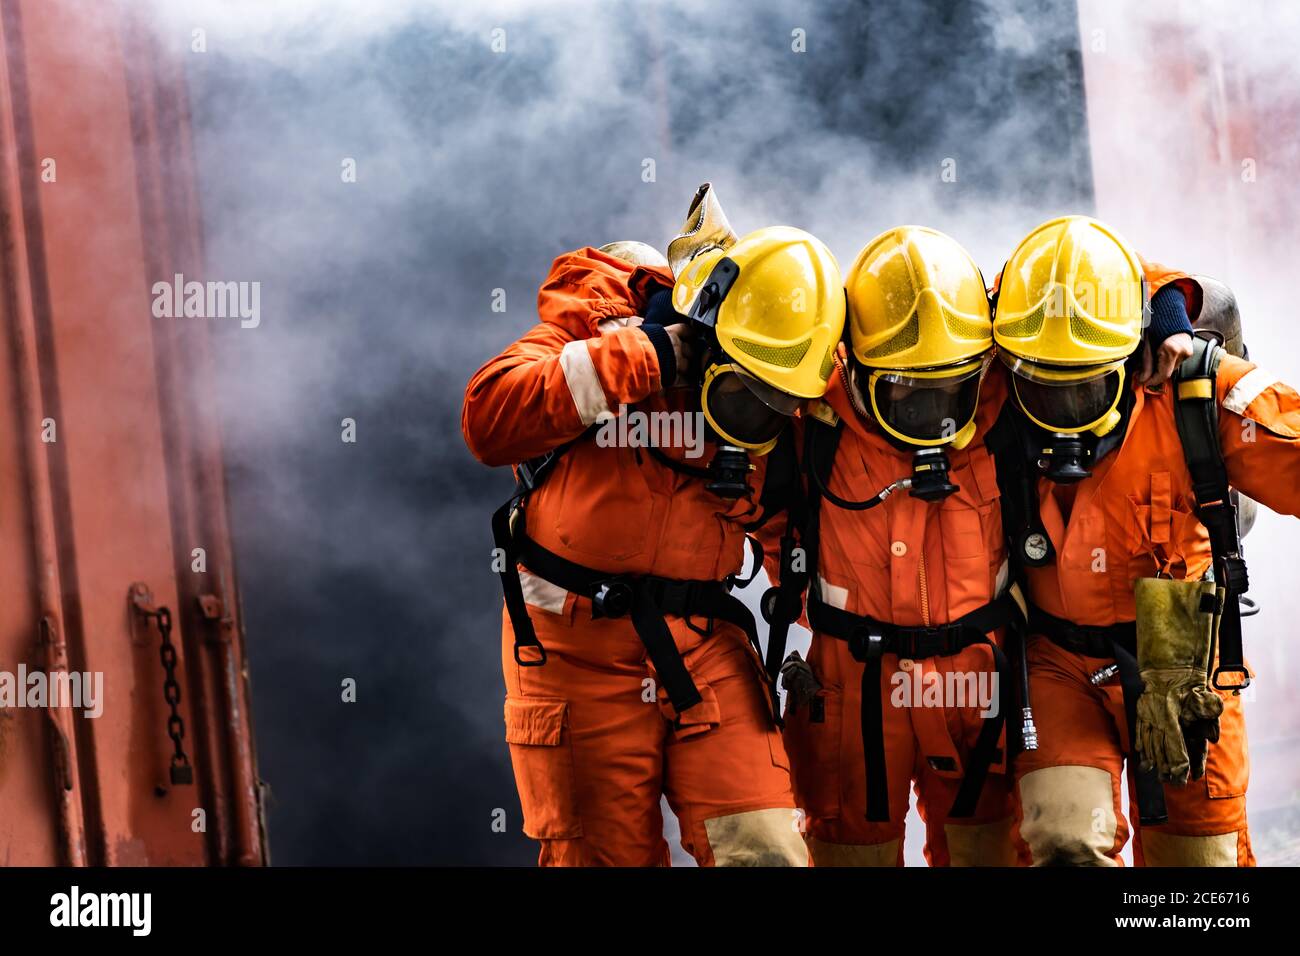 Firefighter rescue colleague from burning building Stock Photo